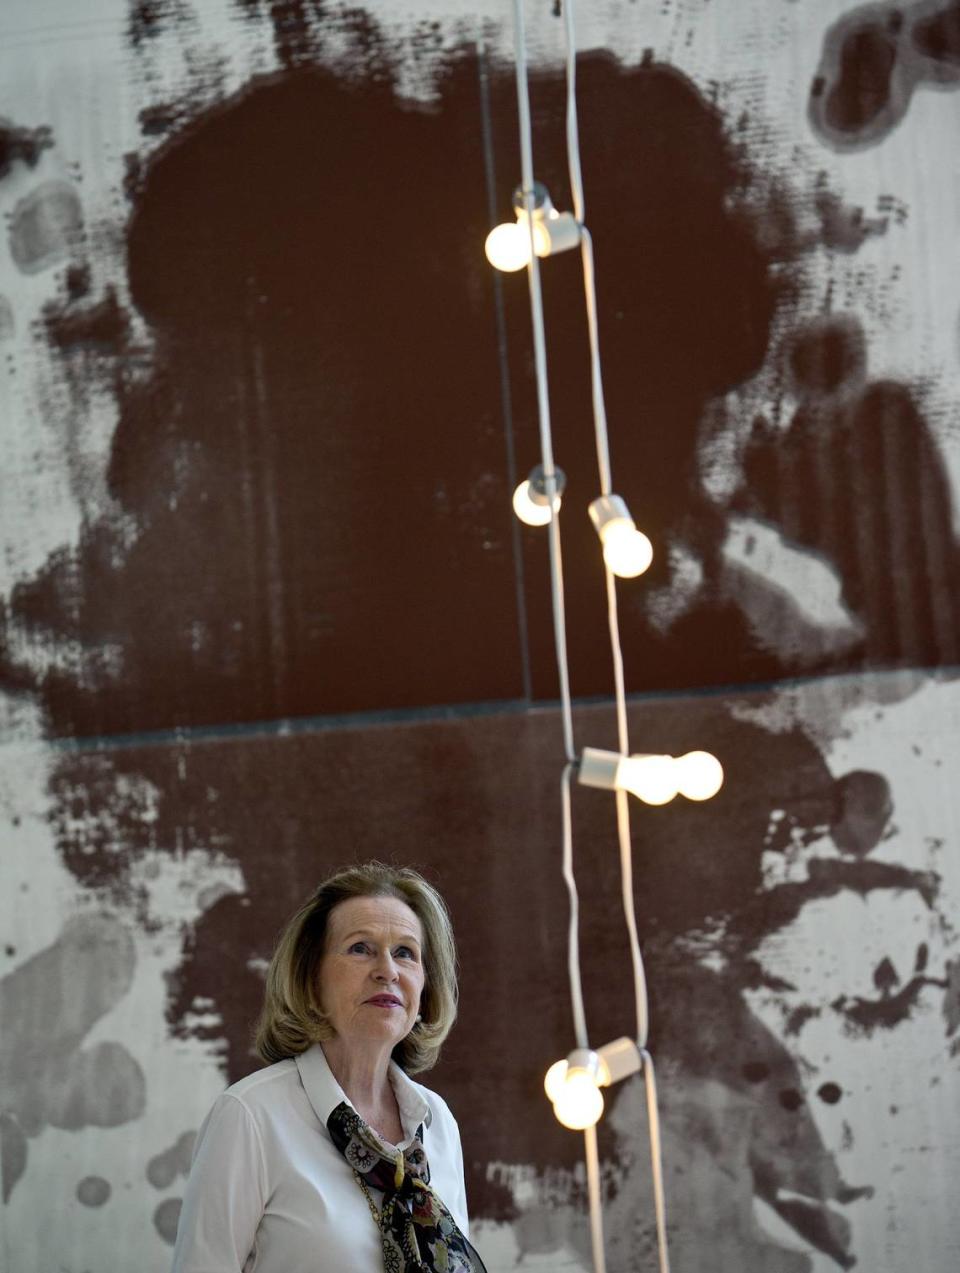 Rosa de la Cruz looks up at a work by Félix Gonzalez-Torres as she stands in front of a work by Christopher Wool at the de la Cruz Collection in the Design District on Thursday, September 22, 2016. The Gonzalez-Torres piece was sold at a Christie’s auction on May 14, 2024 to a Japanese museum for over $13 million.